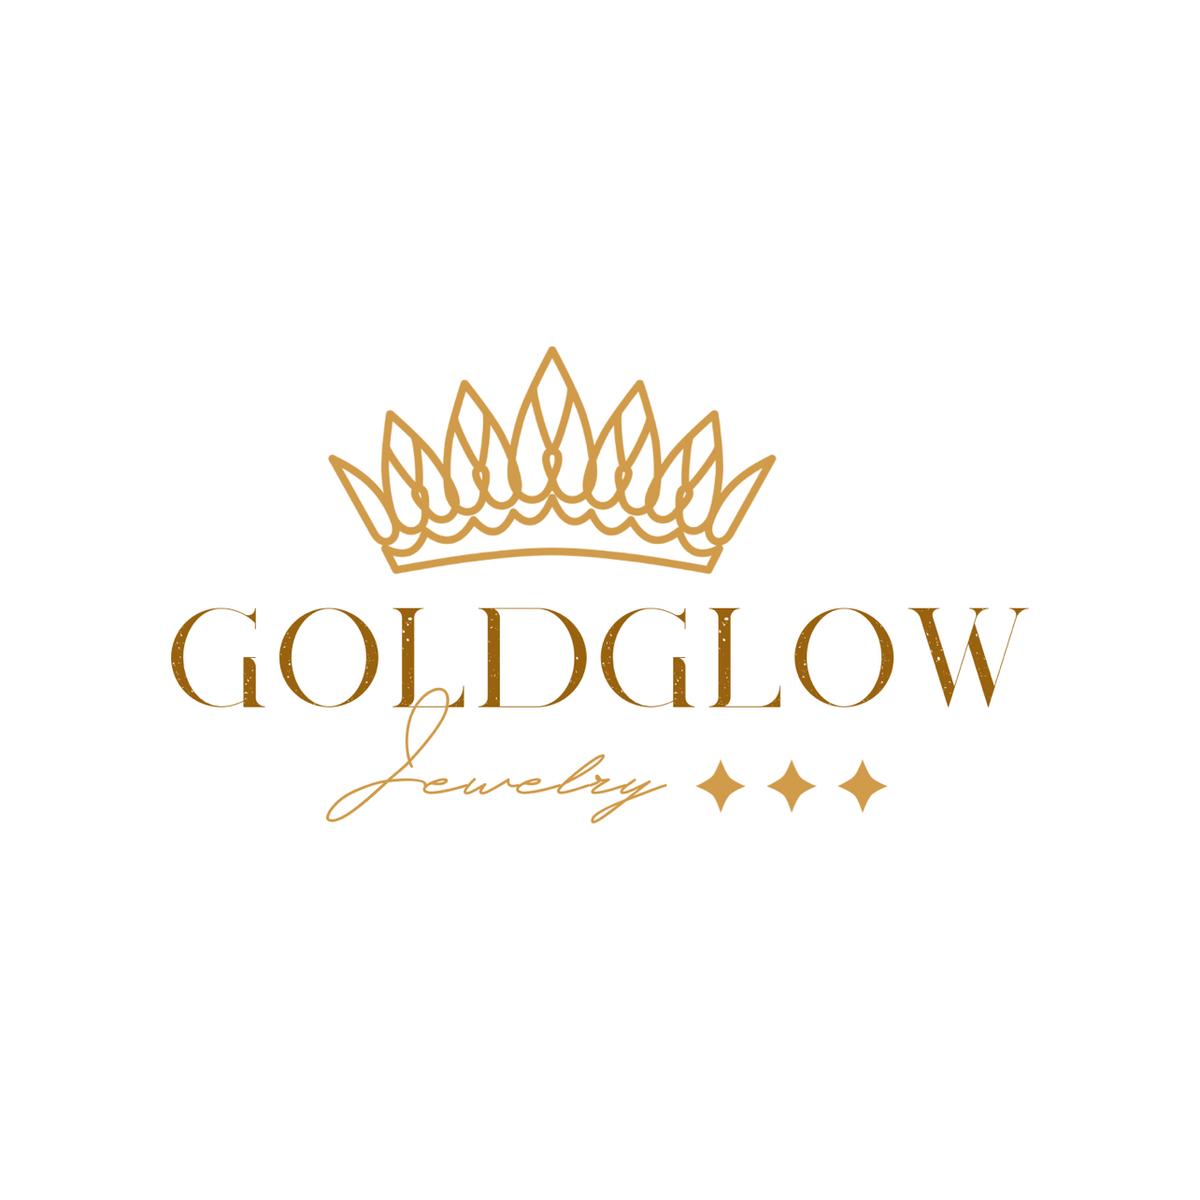 GoldGlowJewelry's images